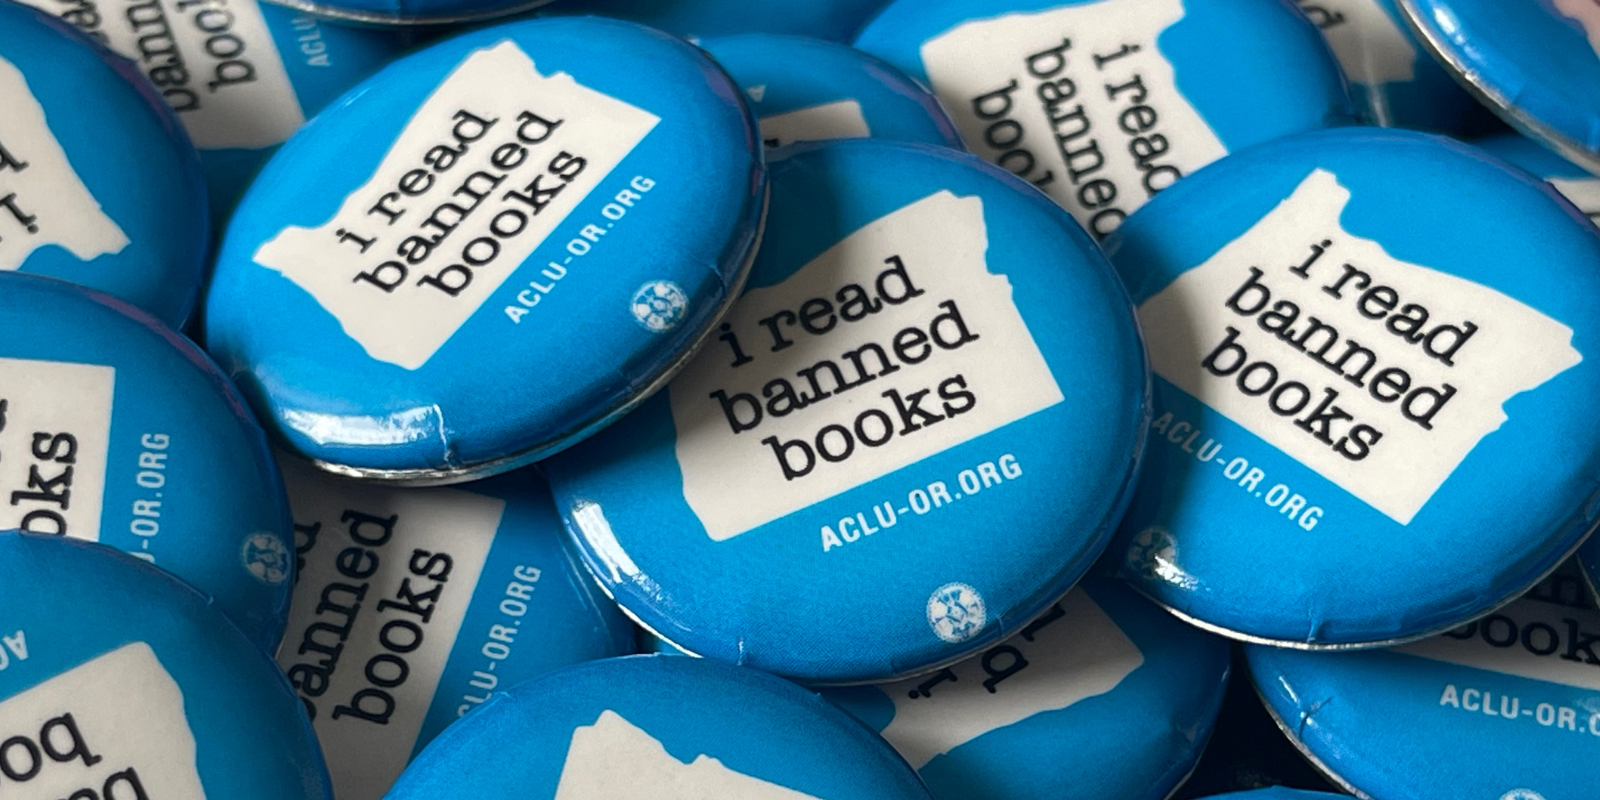 A pile of blue "I read banned books" pins 